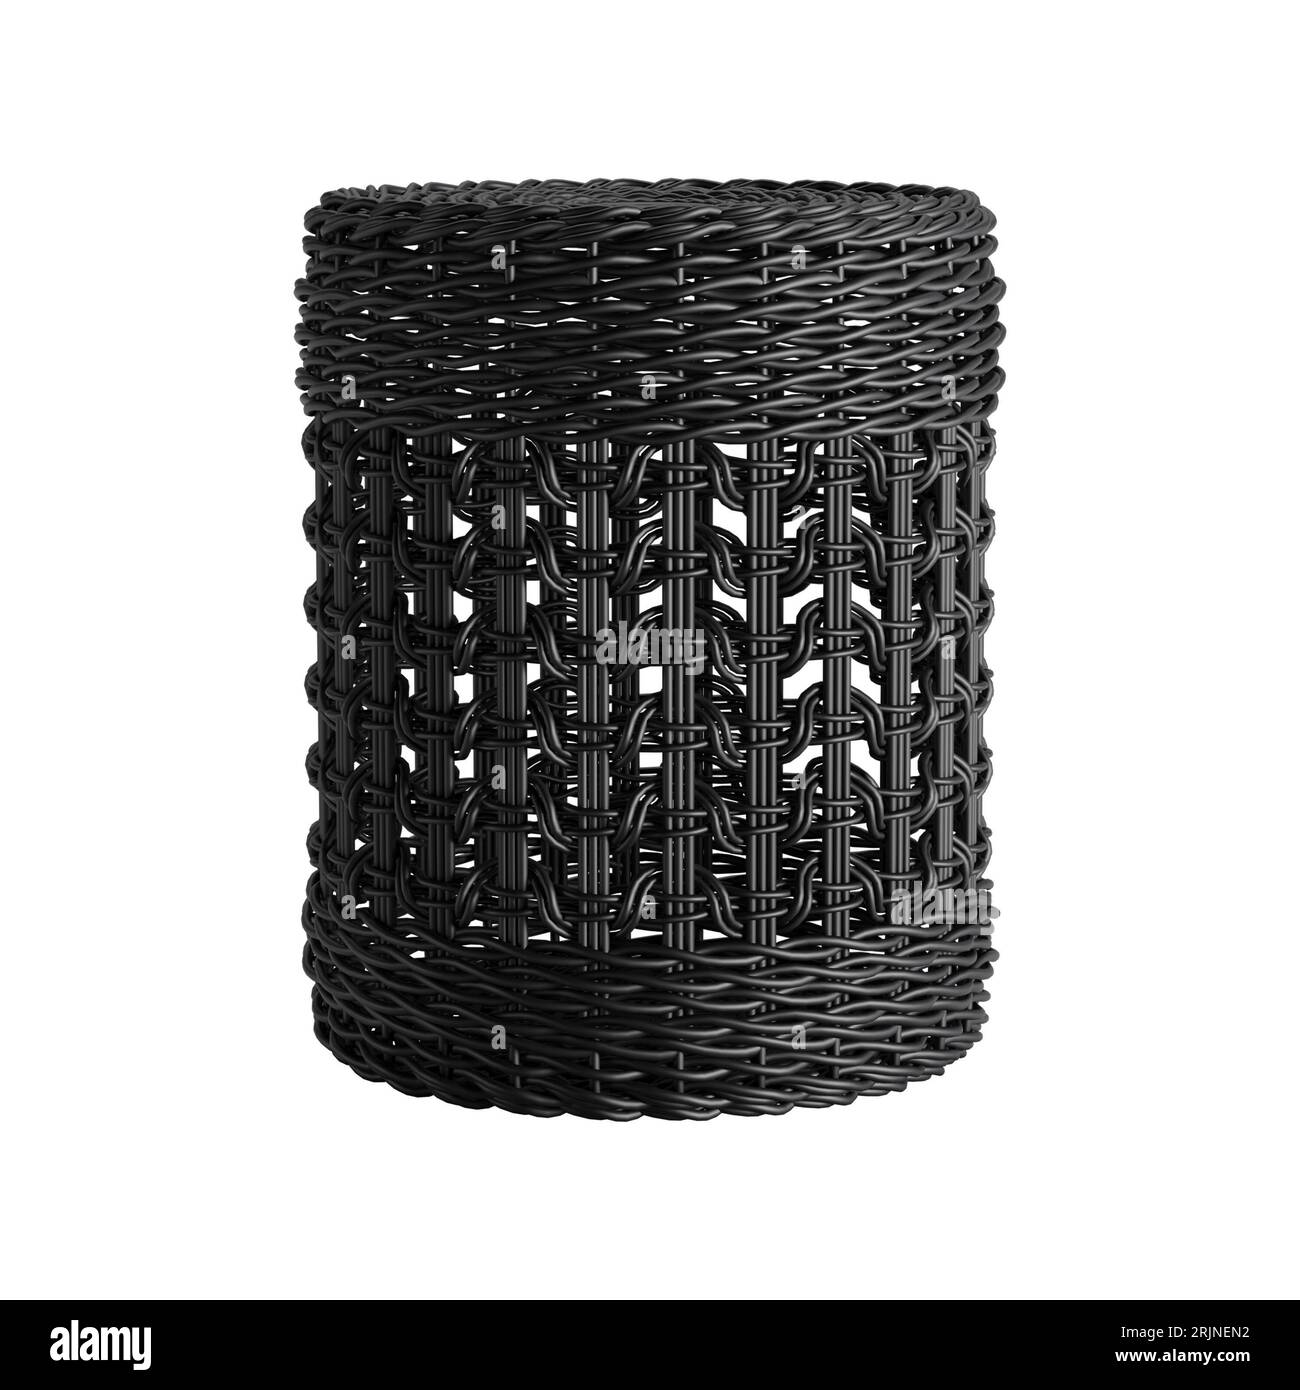 This stock image features a rattan pouf in a studio setting with a white background Stock Photo